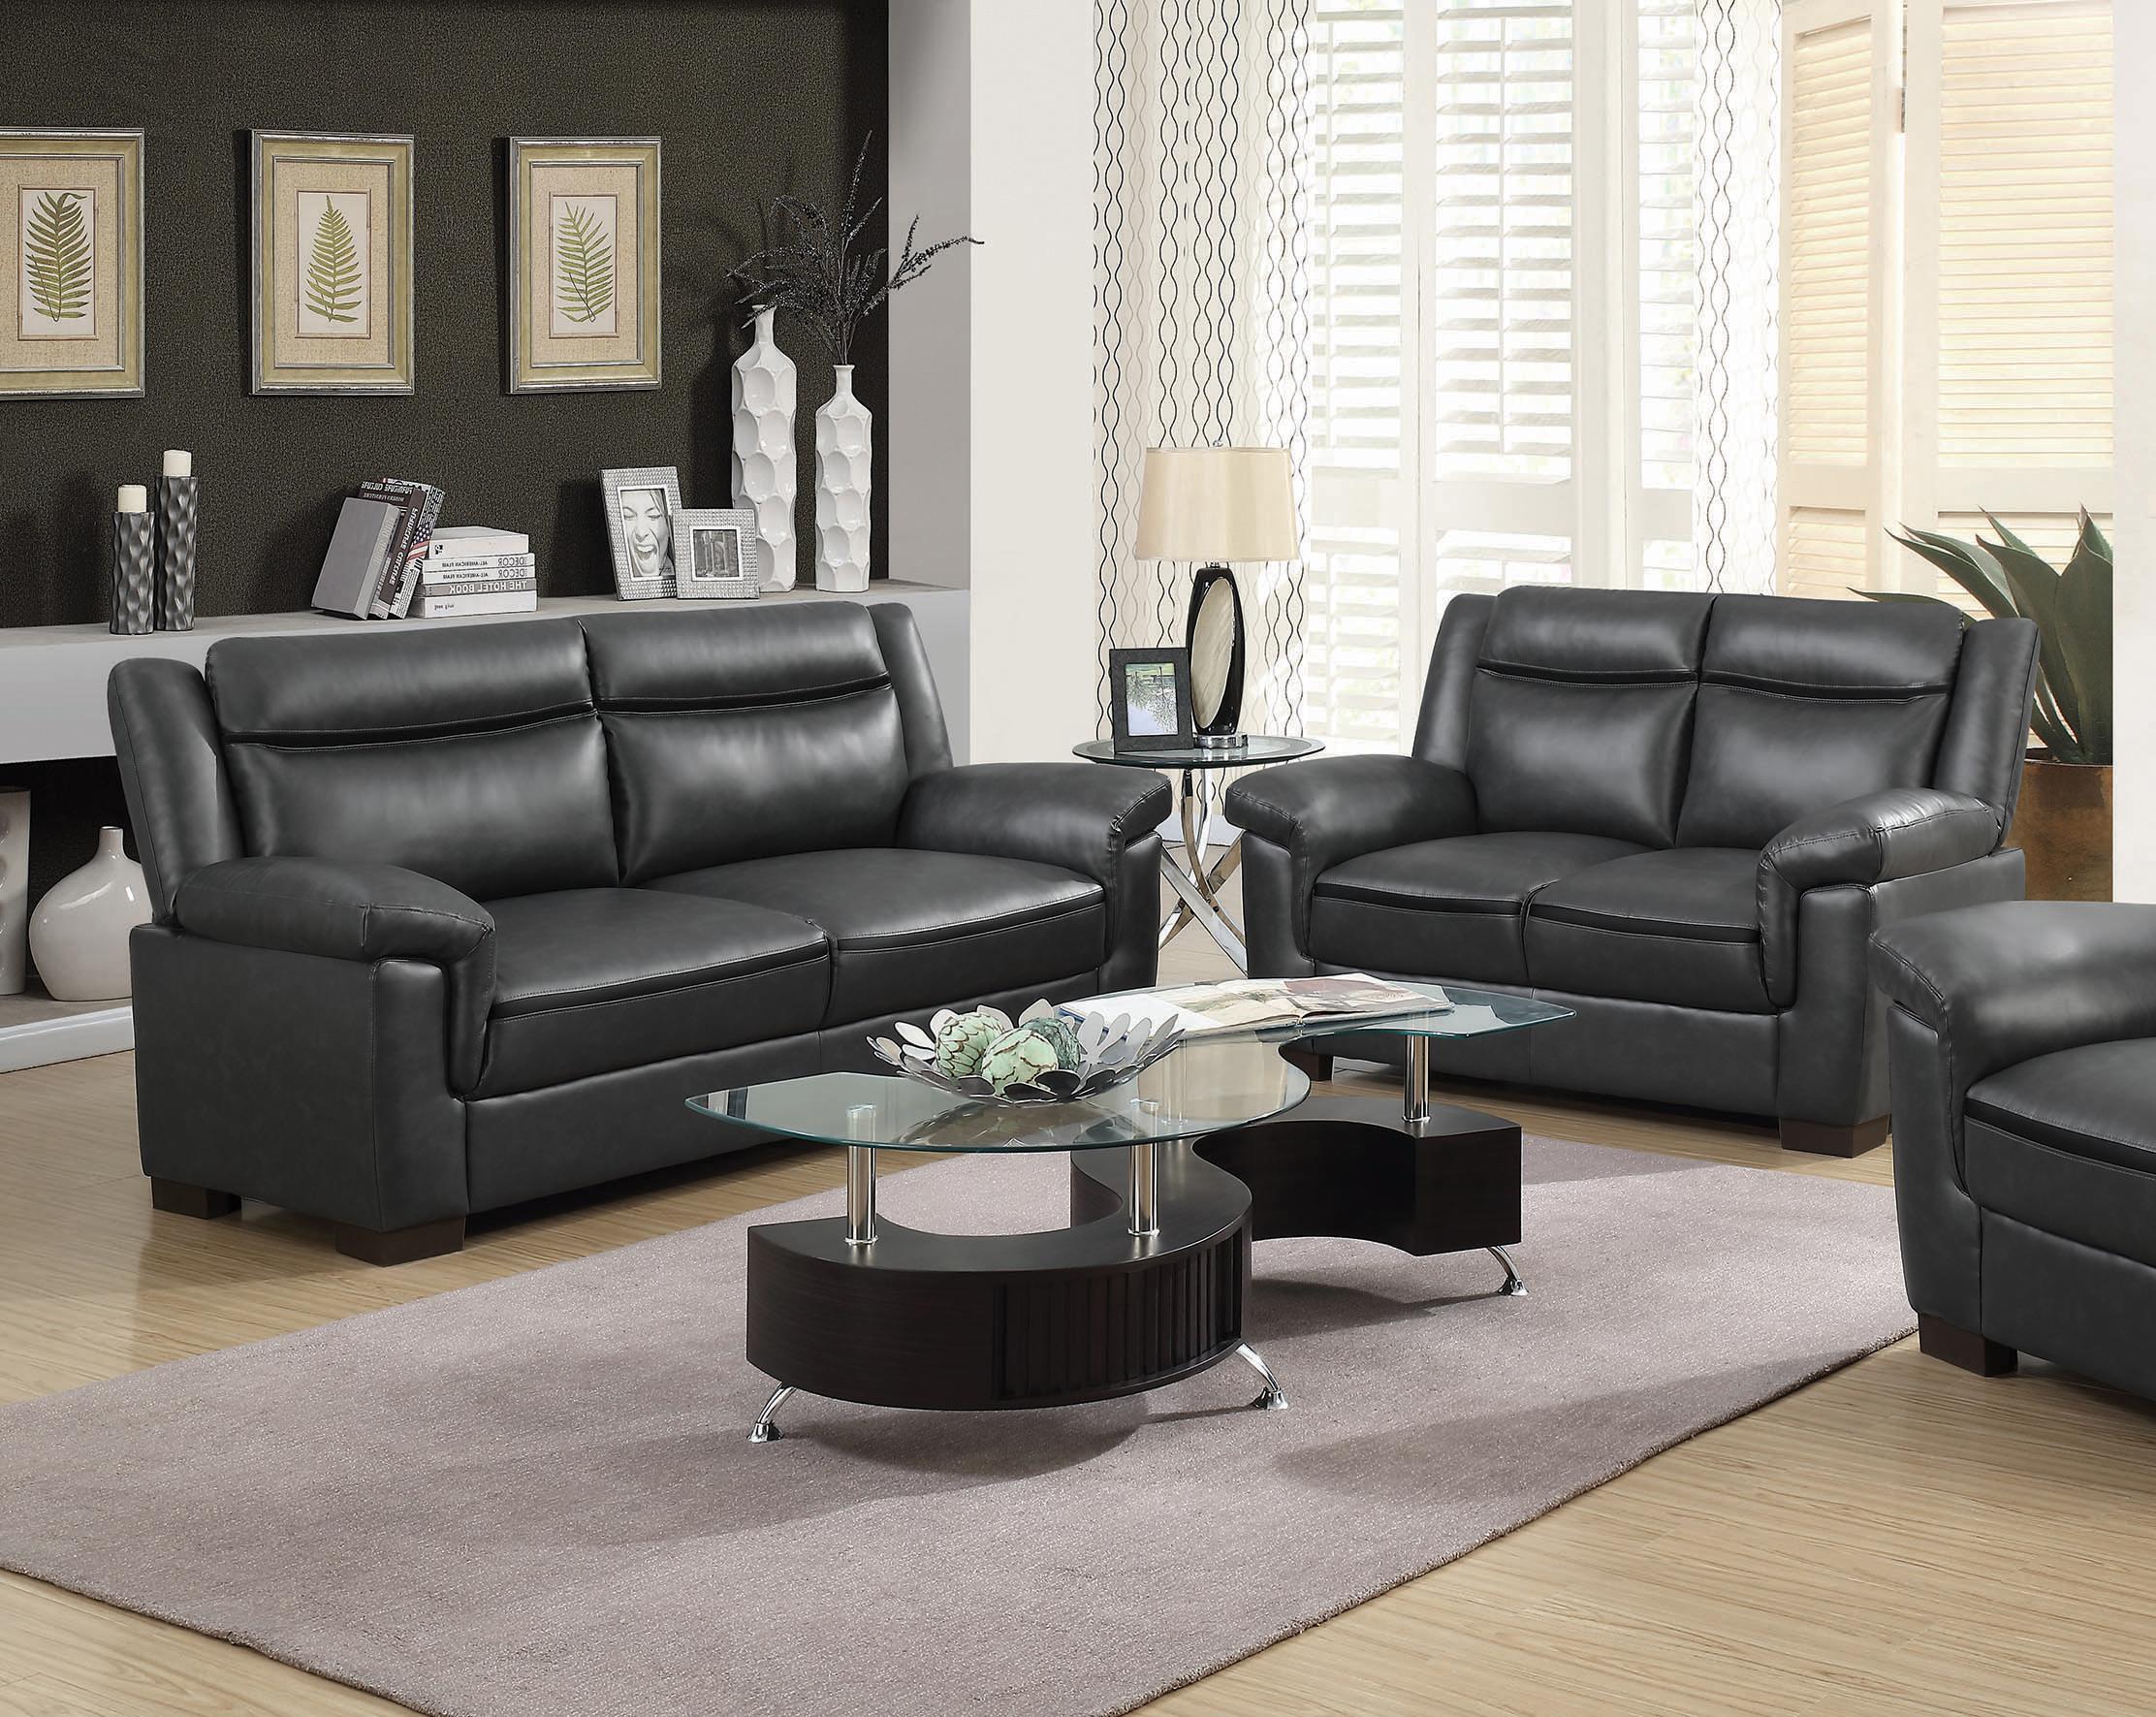 Contemporary Living Room Set 506591-S2 Arabella 506591-S2 in Gray Leatherette